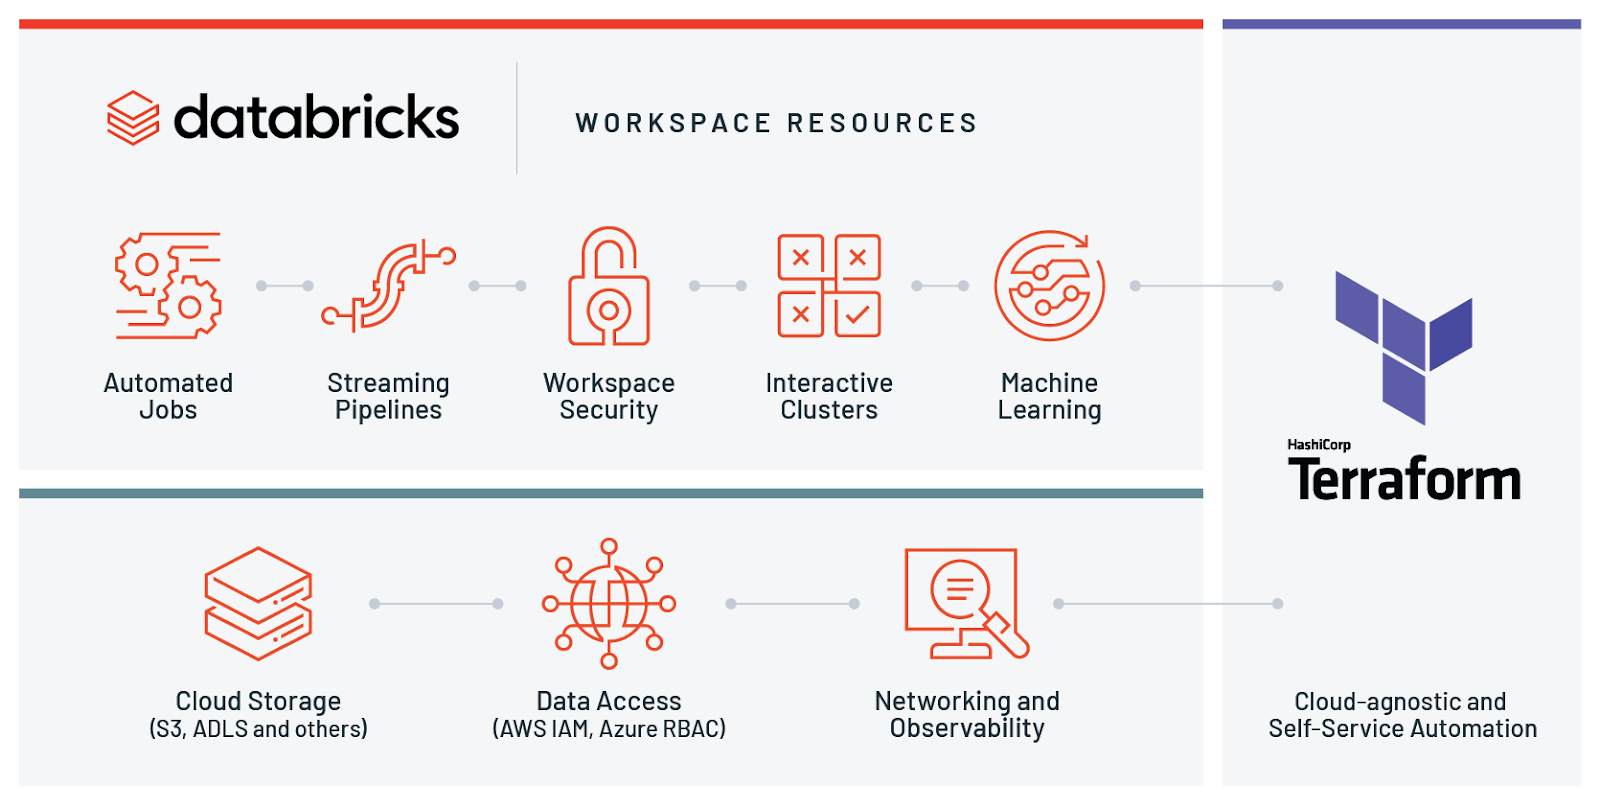 Architecture for managing Databricks workspaces on Azure and AWS via Terraform.